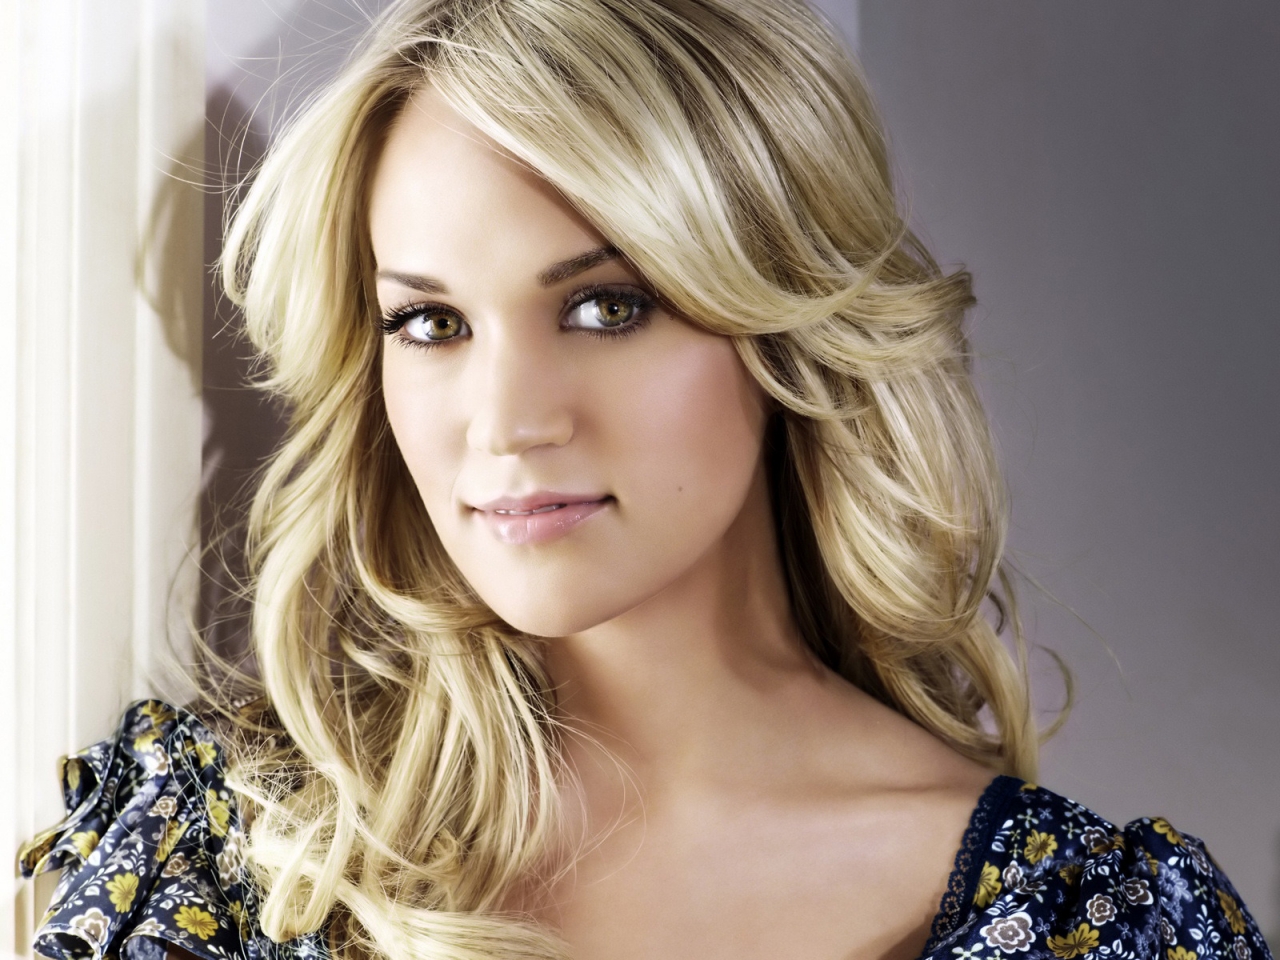 Amazing Carrie Underwood for 1280 x 960 resolution